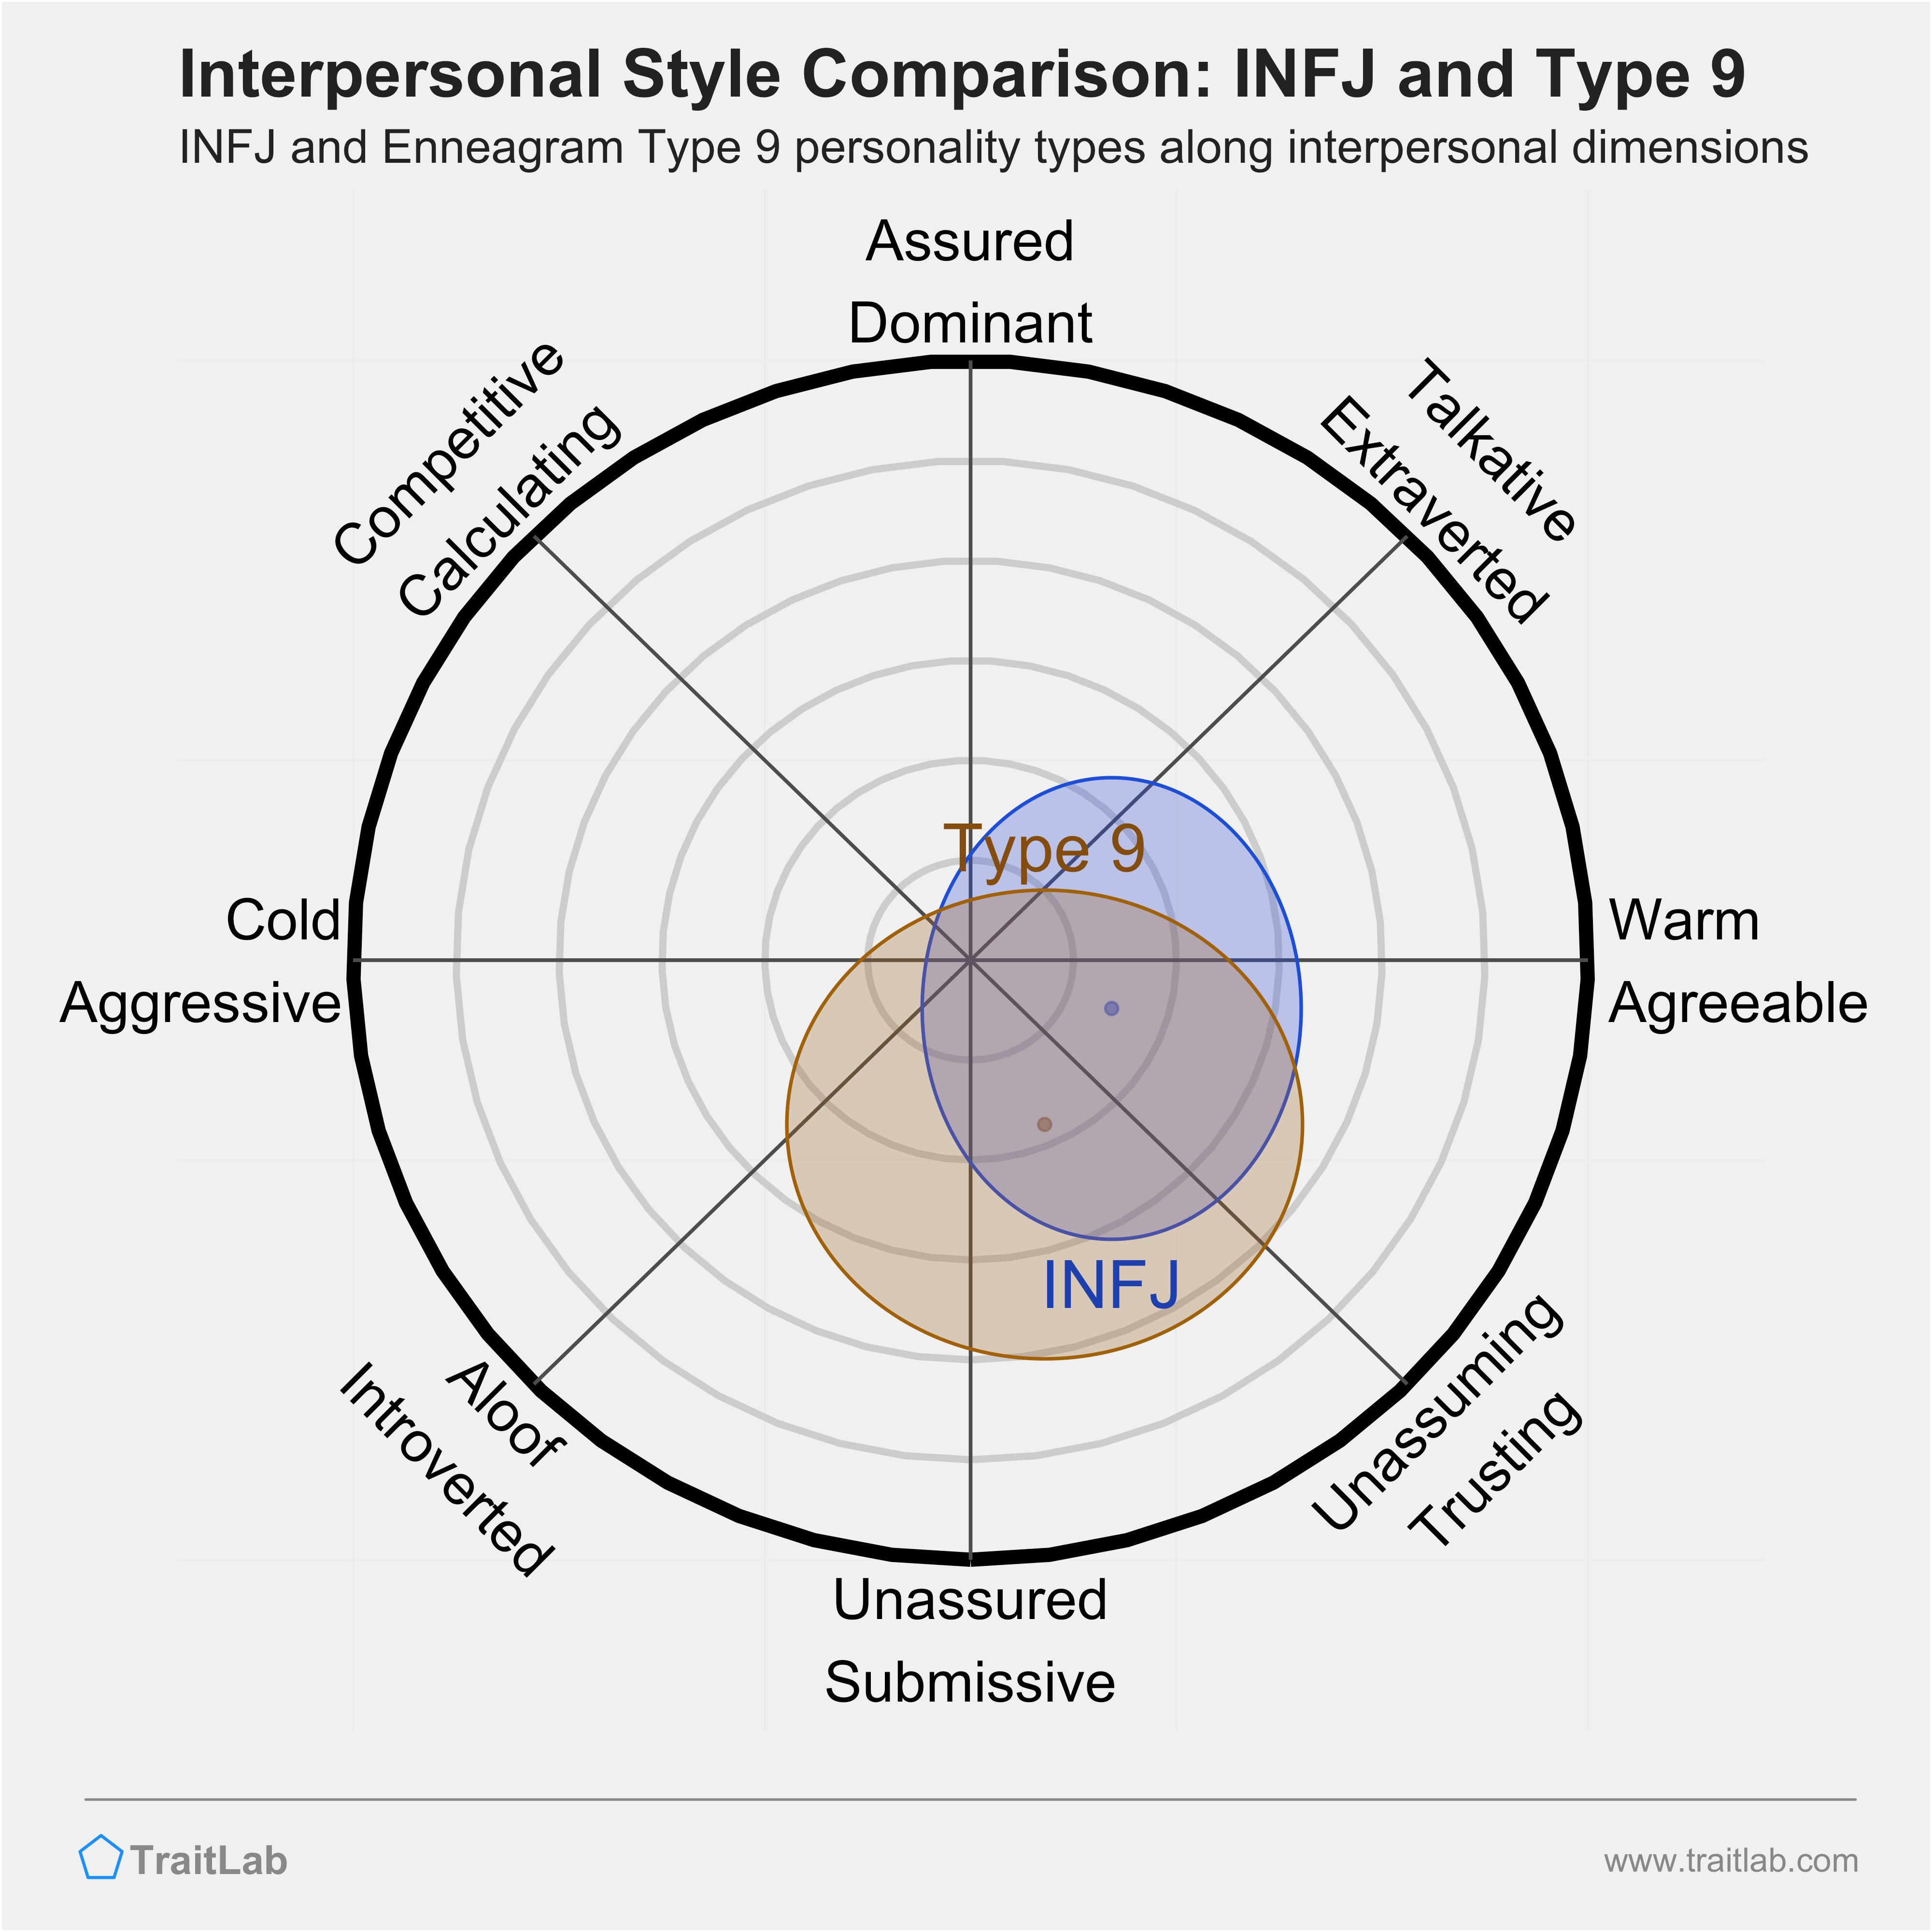 Enneagram INFJ and Type 9 comparison across interpersonal dimensions